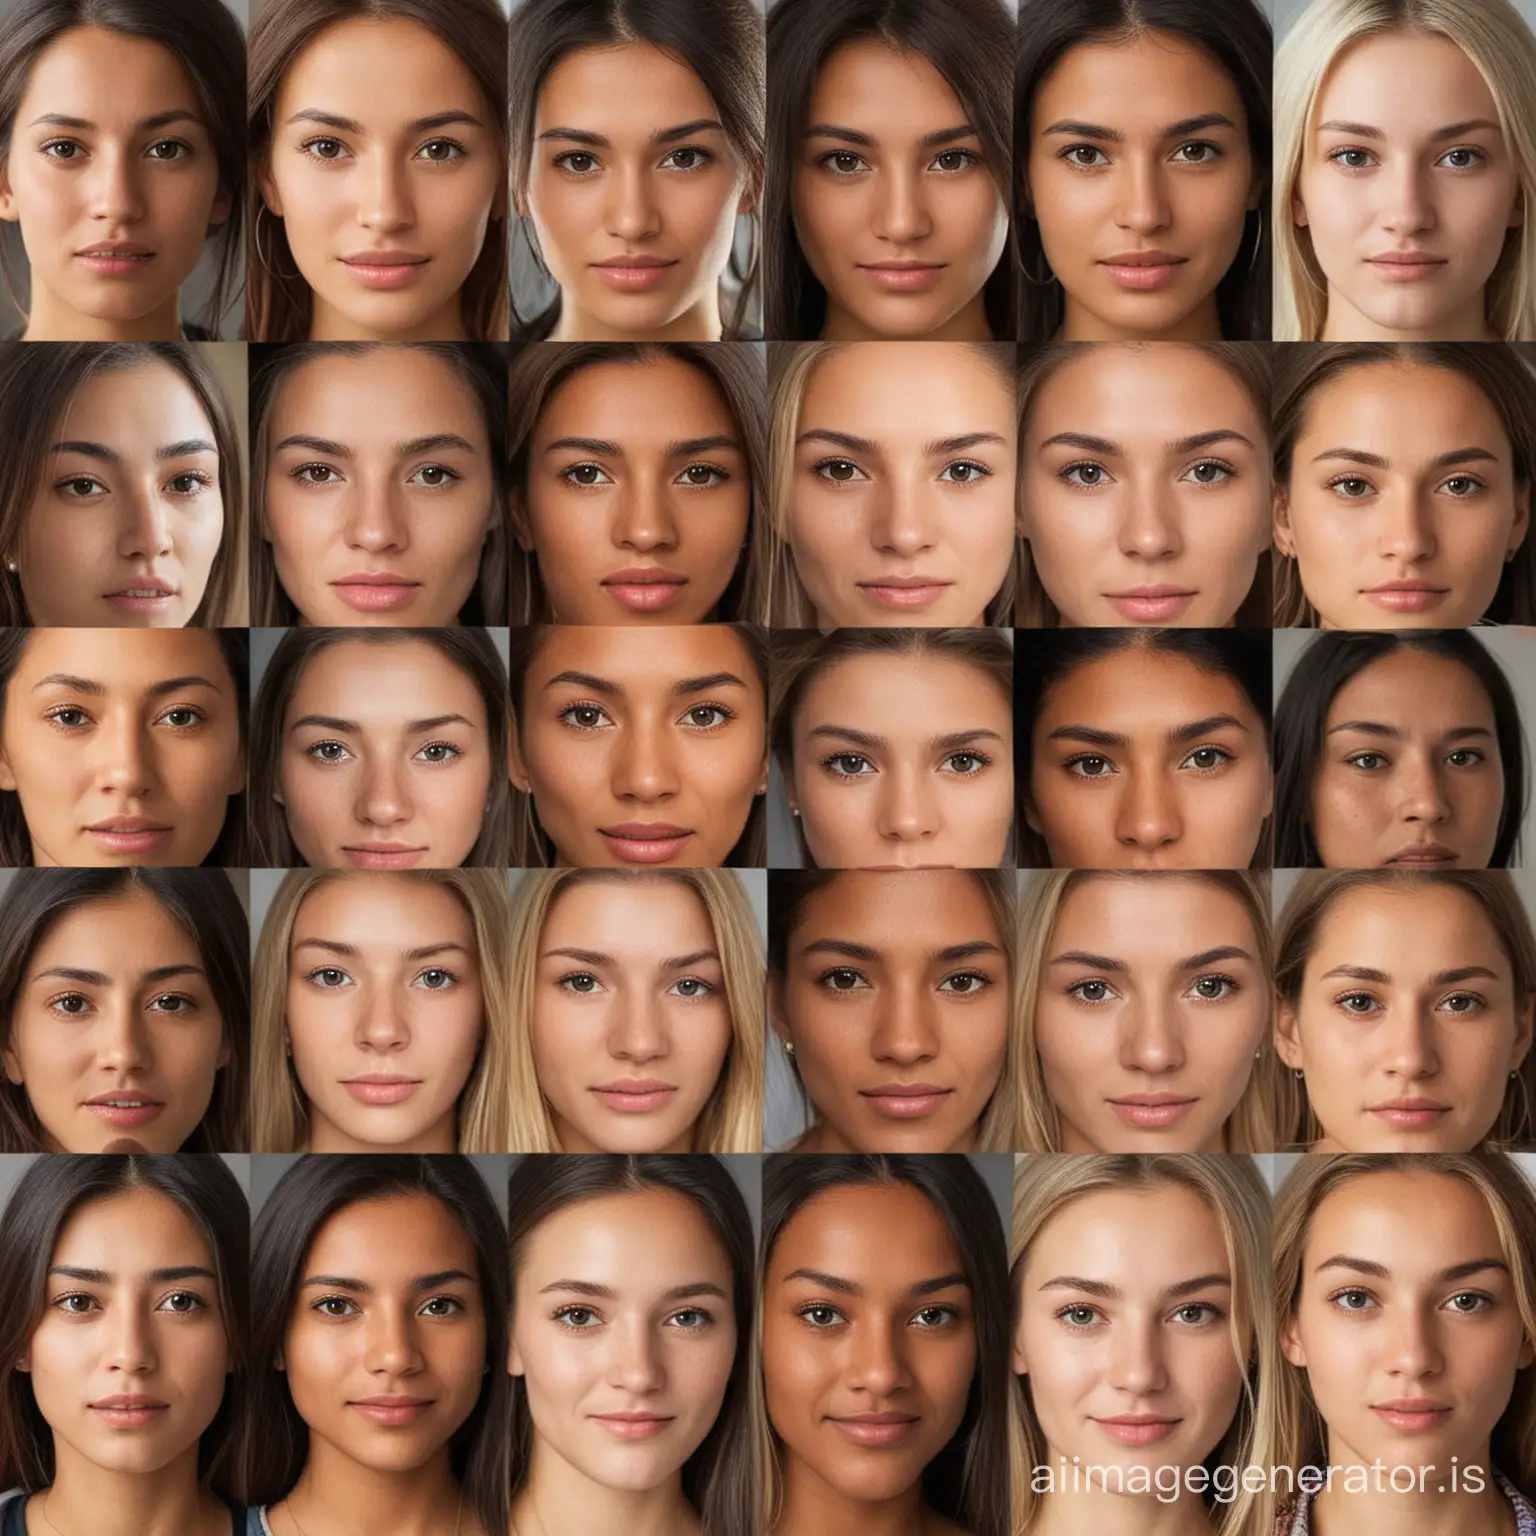 Faces of women from different countries around the world